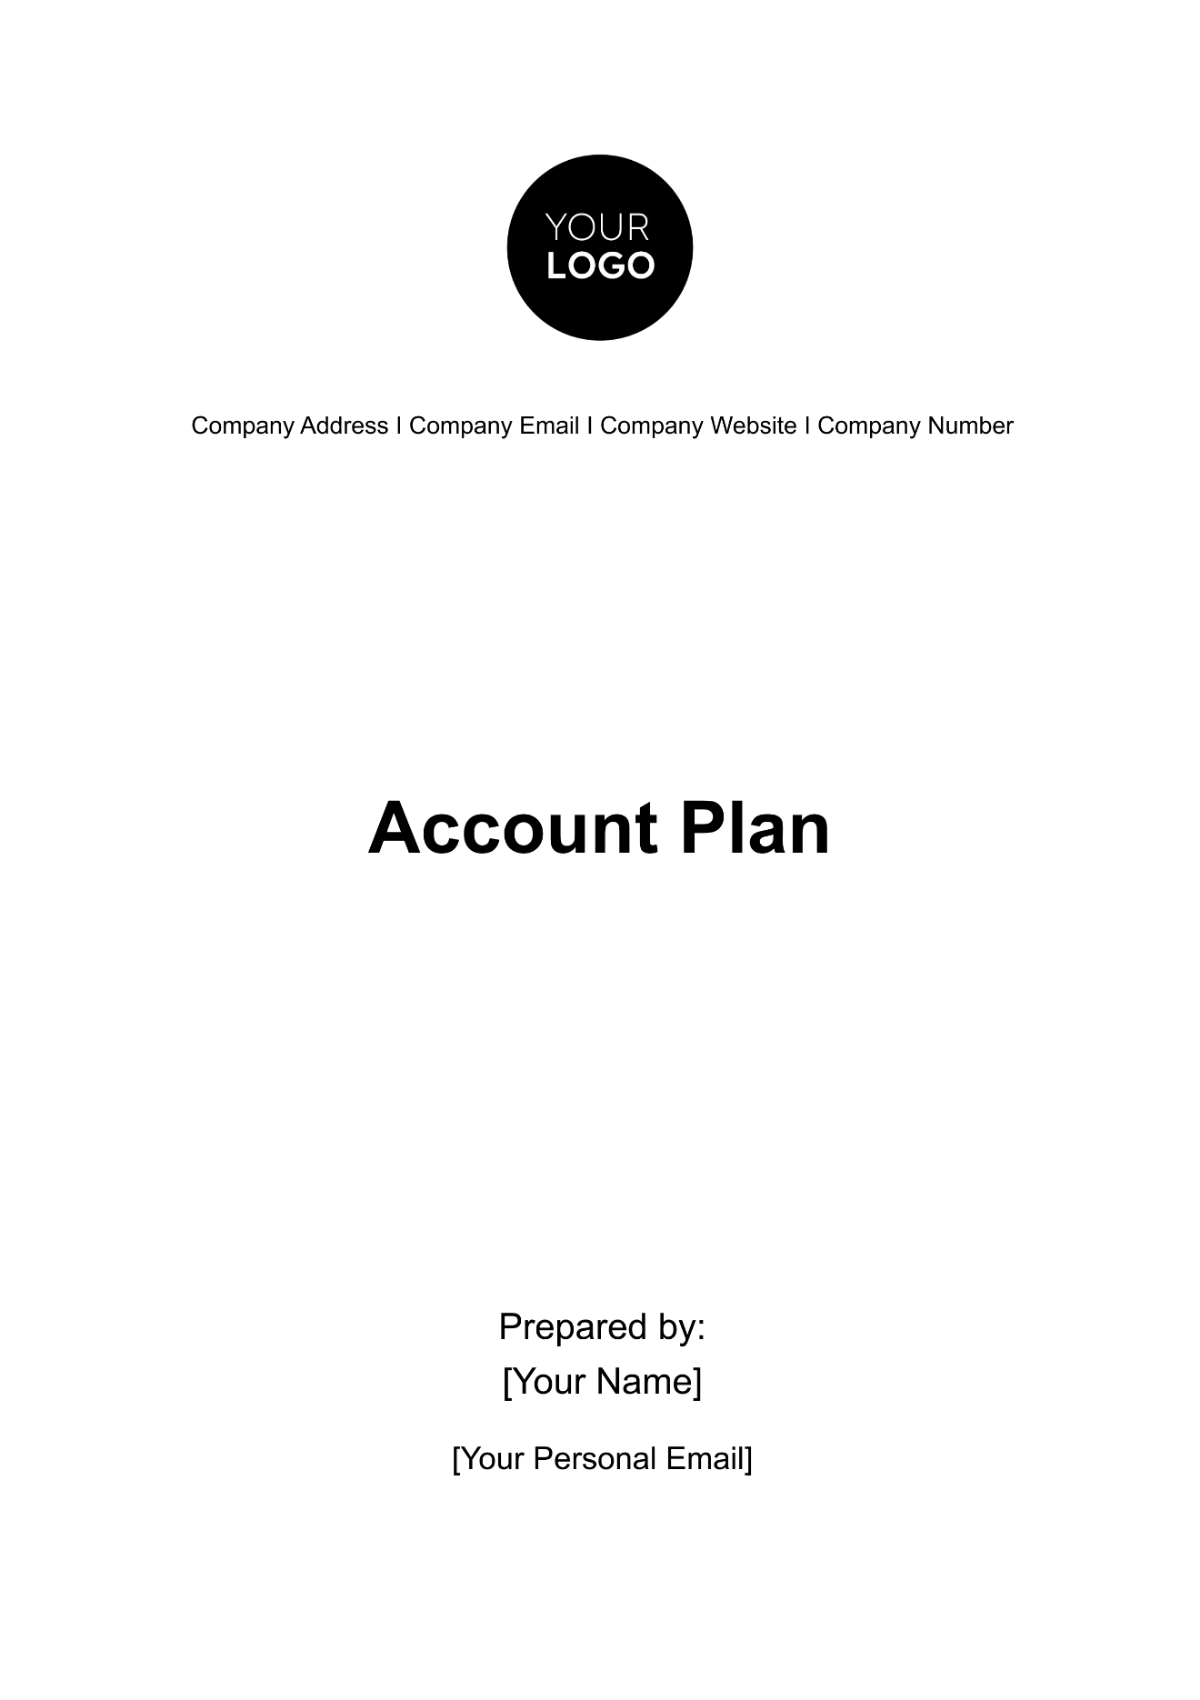 Account Plan Template